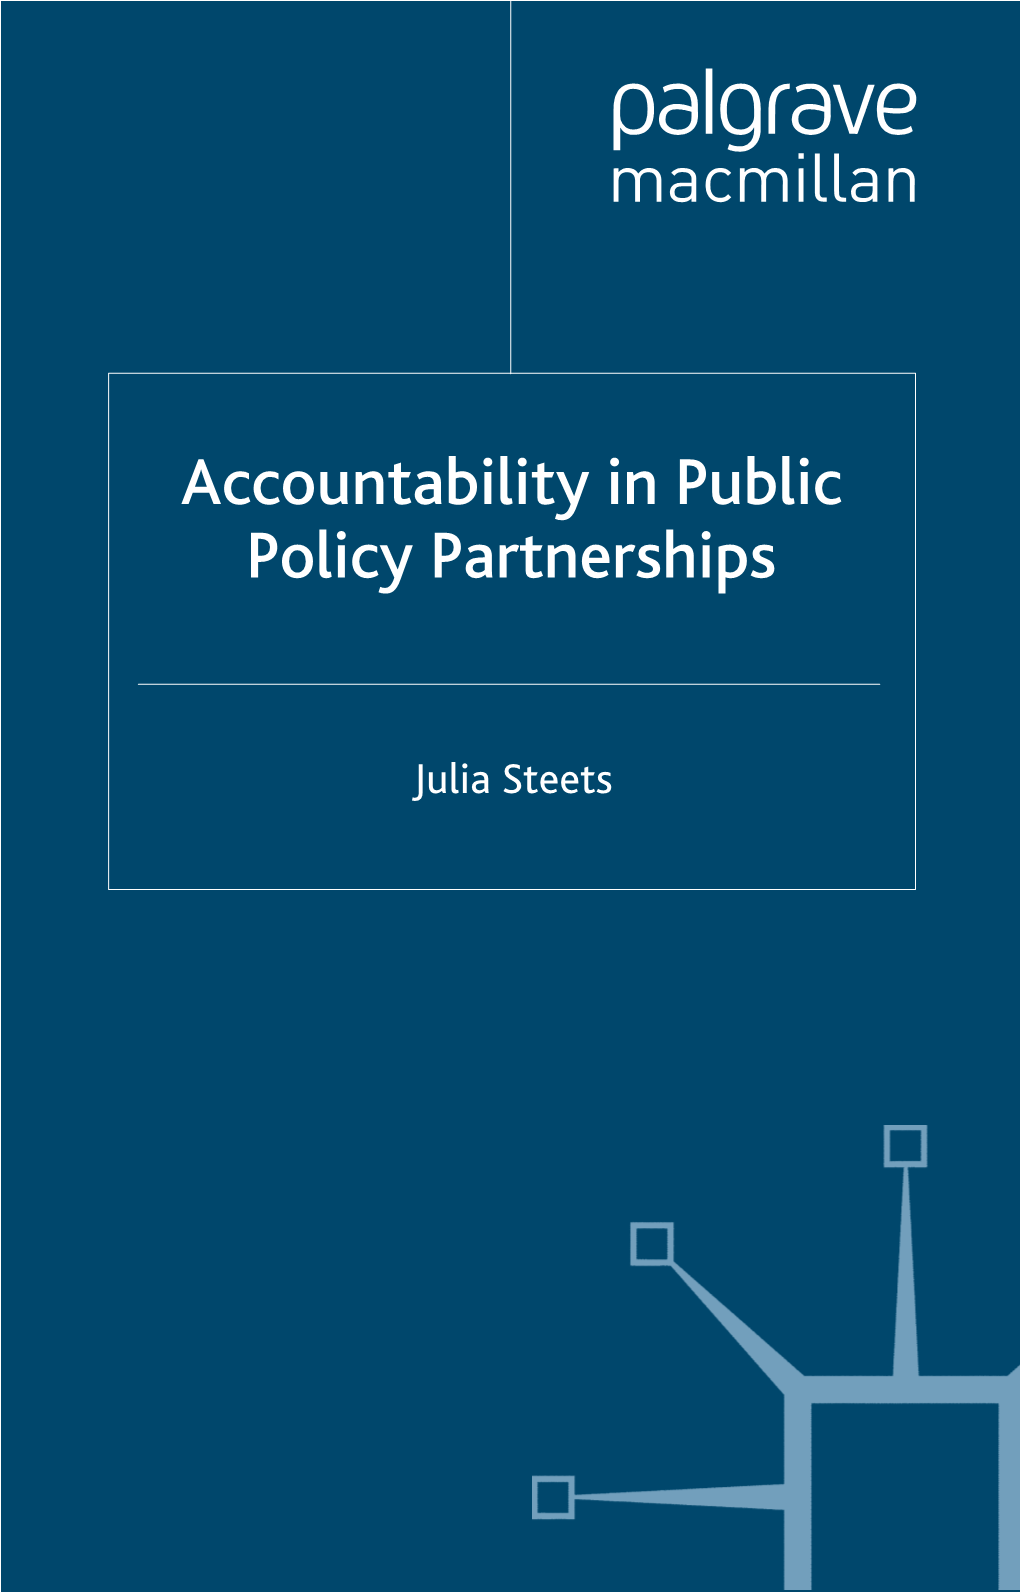 Accountability in Public Policy Partnerships